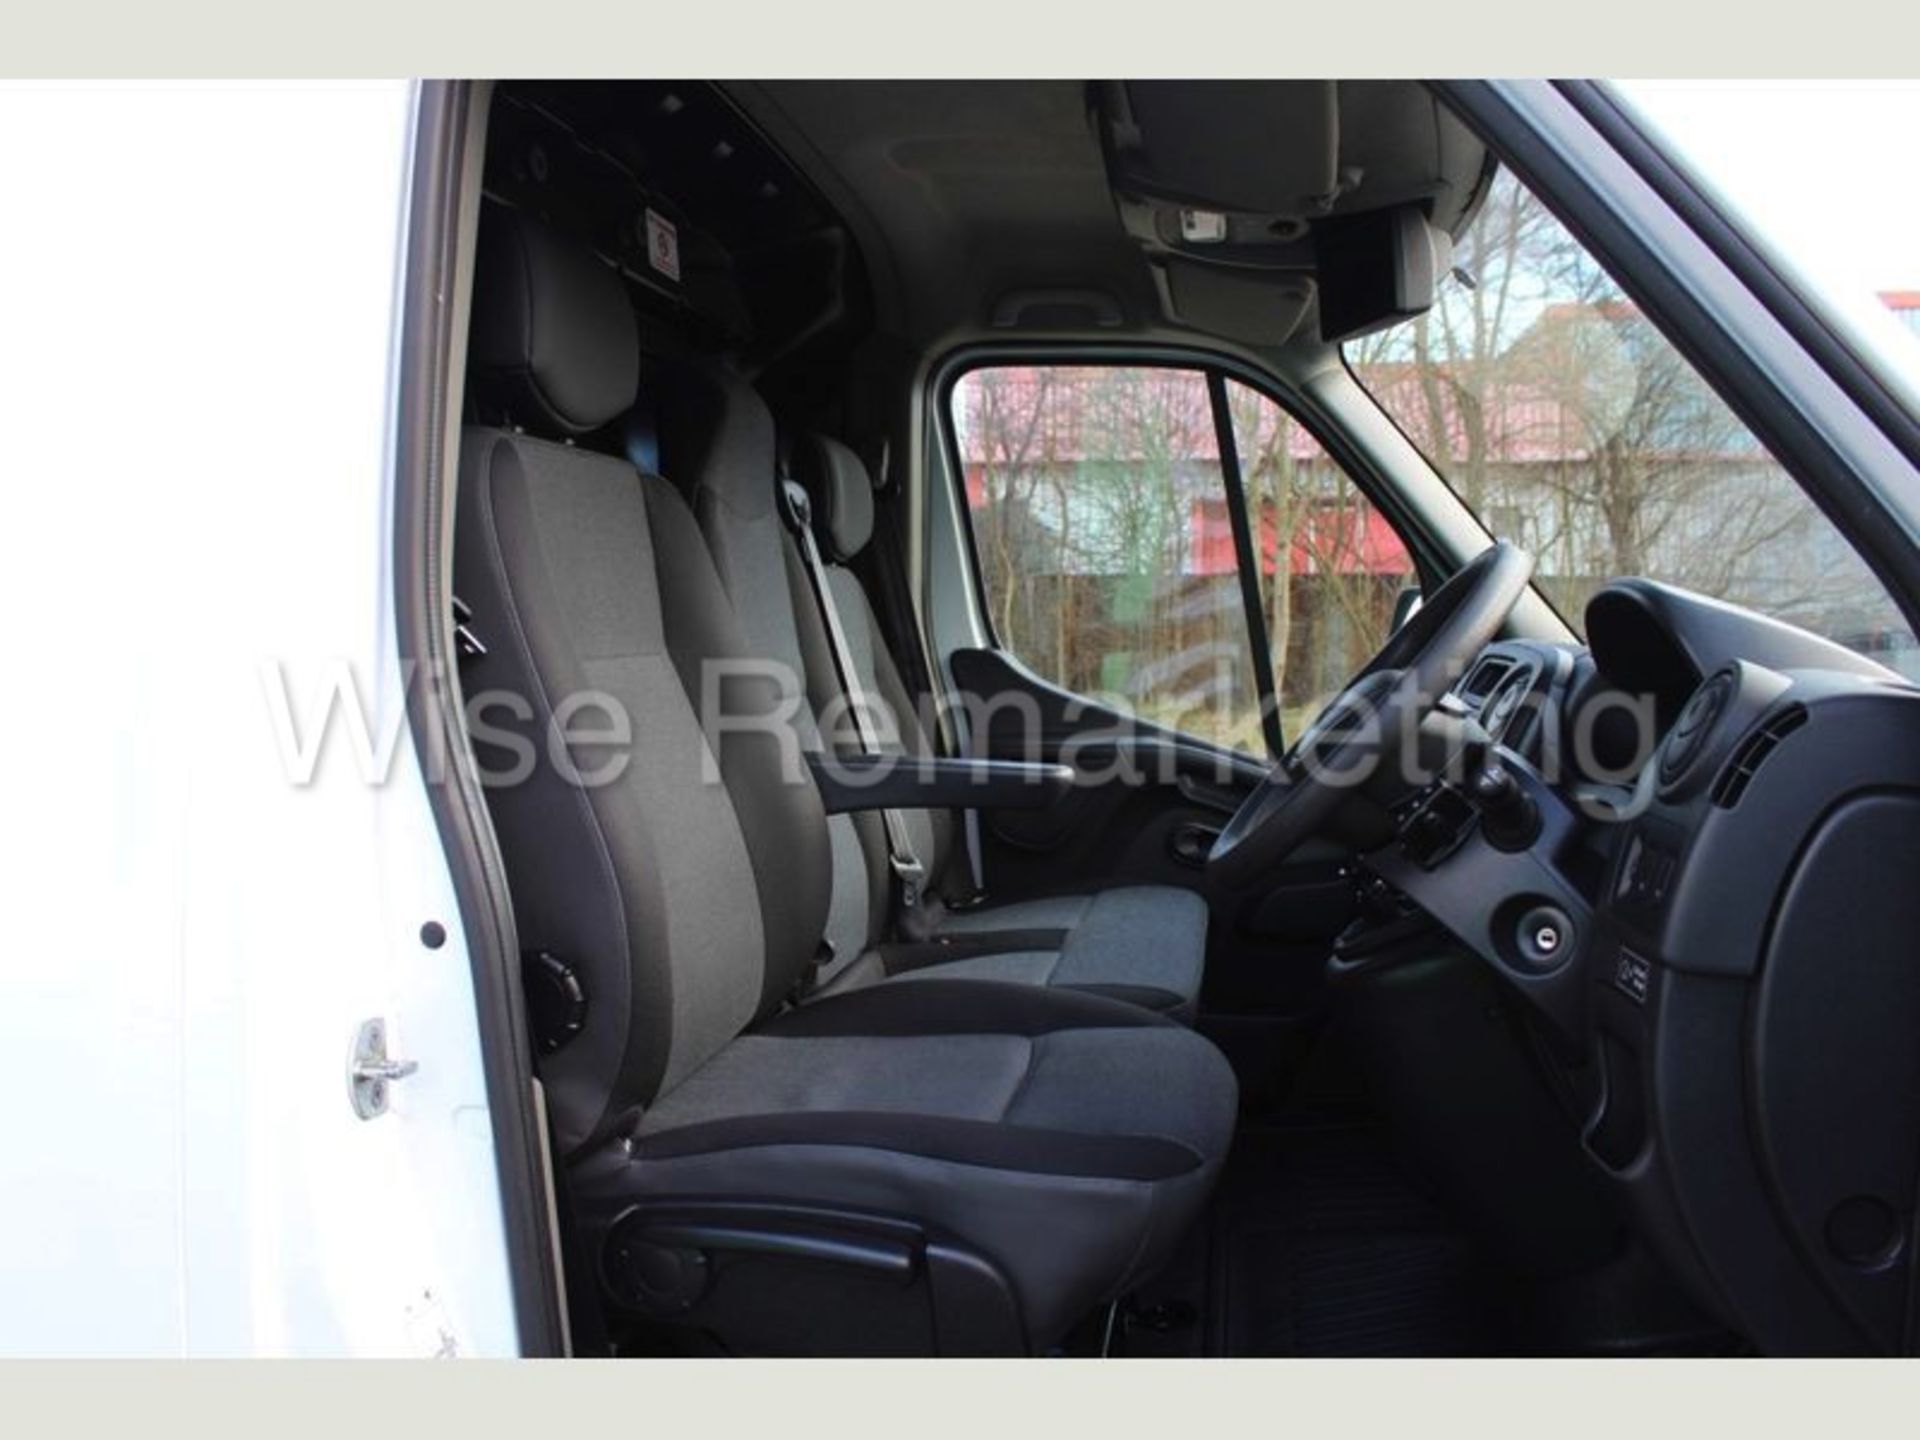 Renault Master L3H3 *LWB - Super Roof* (2018 ~ Euro 6 Compliant) Air Con - Electric Pack (1 Owner) - Image 11 of 11